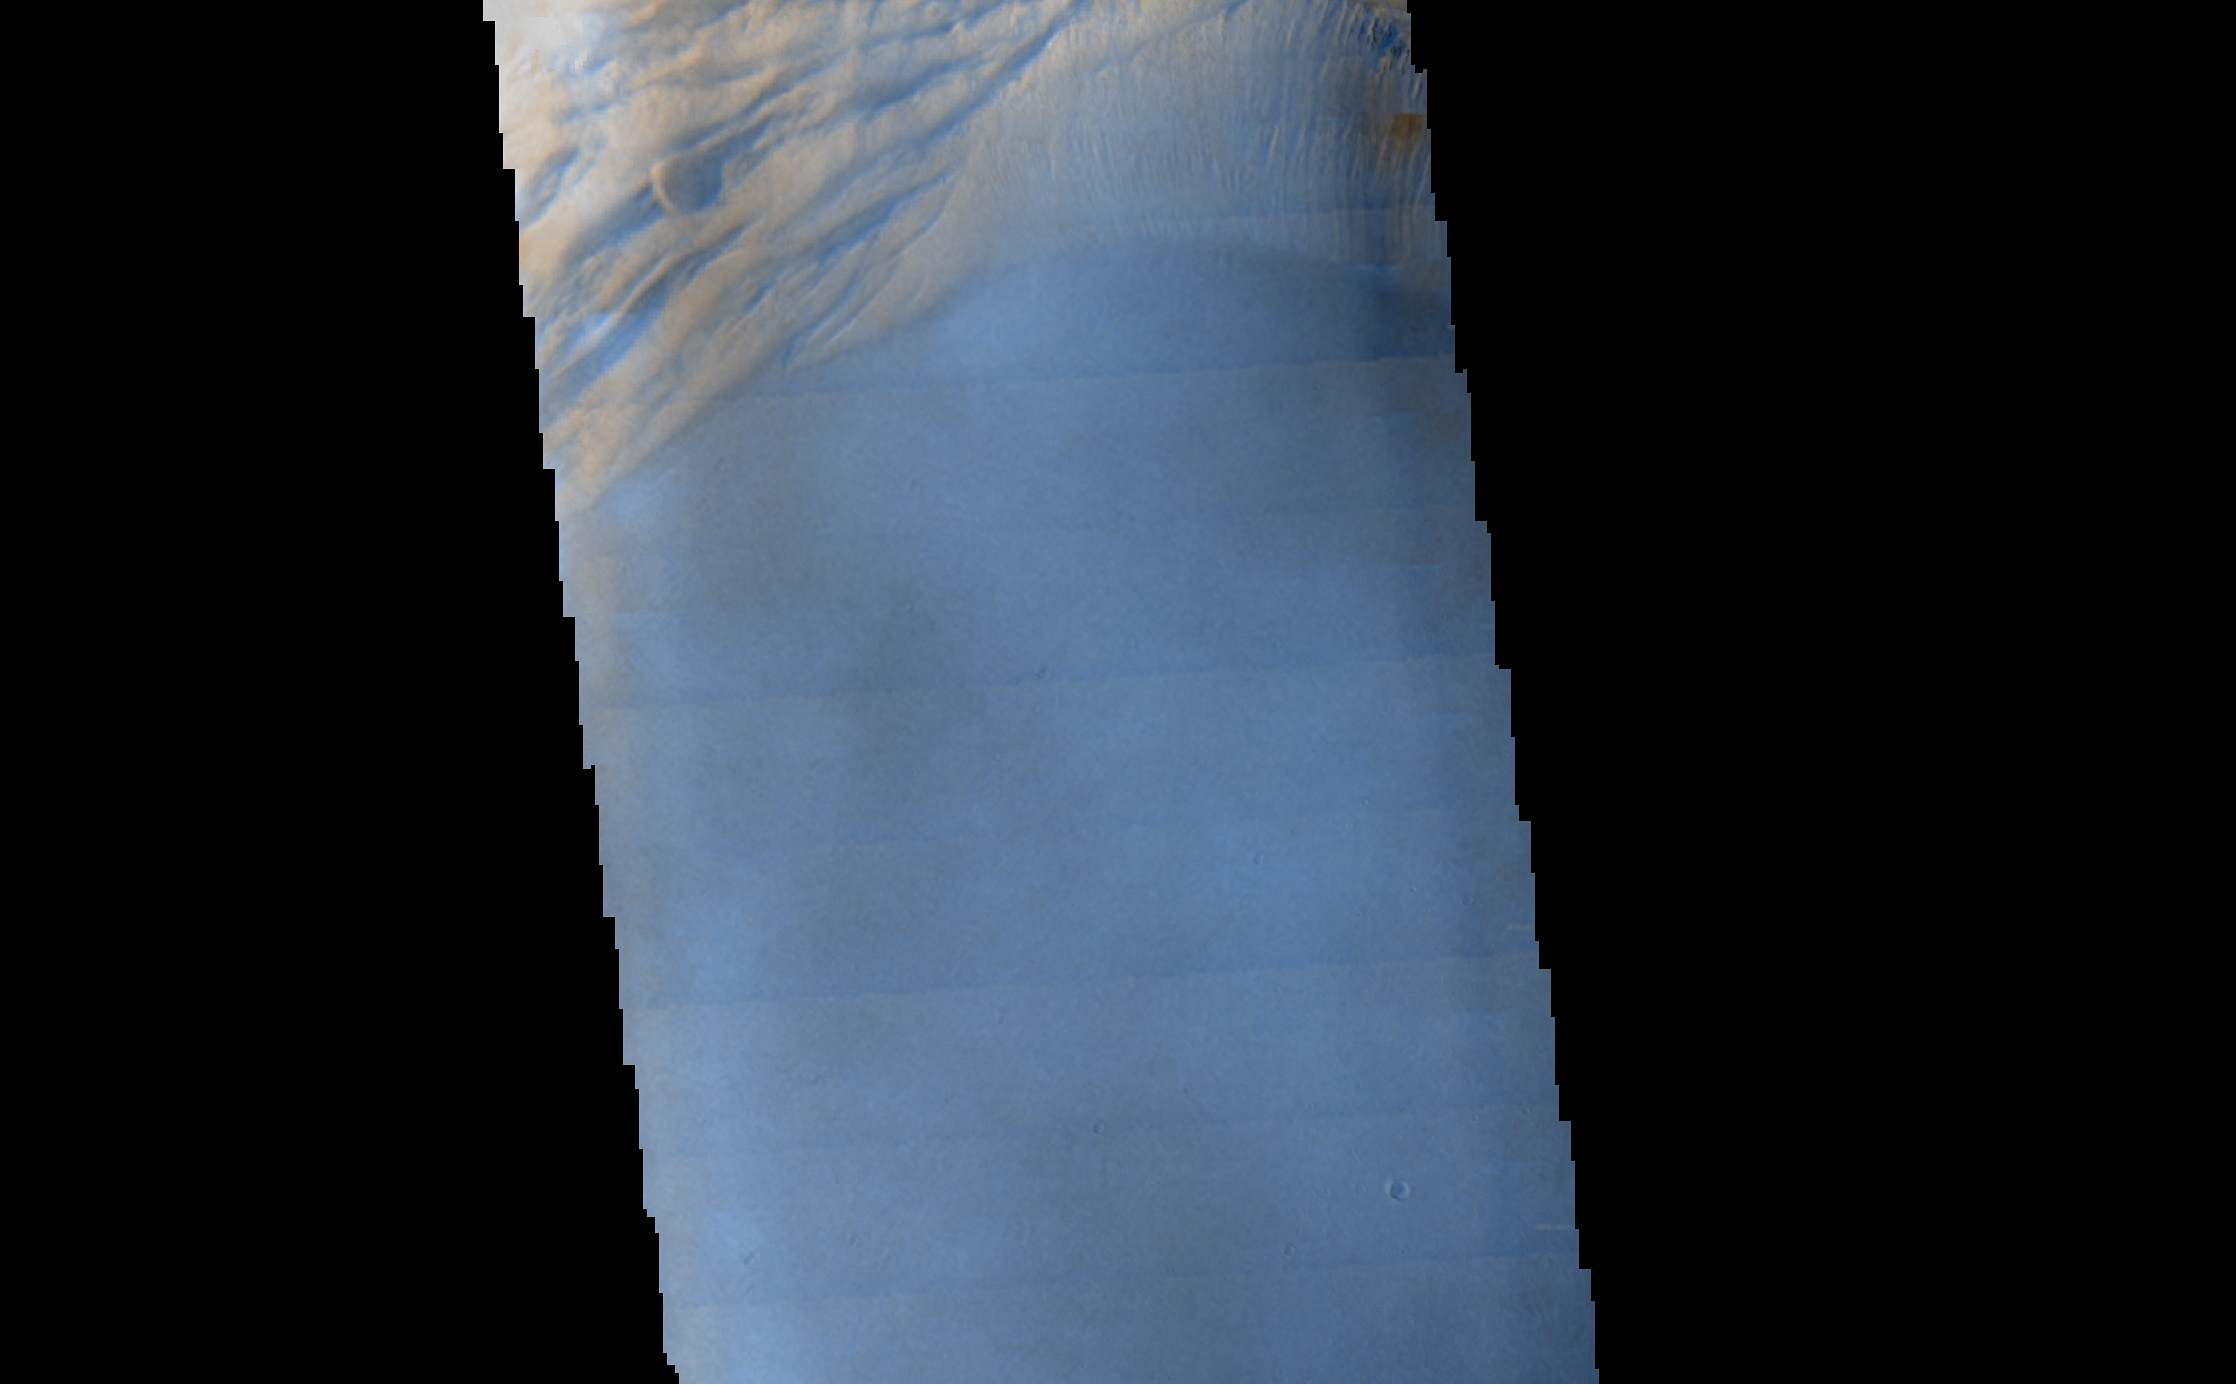 Seen shortly after local Martian sunrise, clouds gather in the summit pit, or caldera, of Arsia Mons, a giant volcano on Mars, in this image from the Thermal Emission Imaging System (THEMIS) on NASA's Mars Odyssey orbiter.